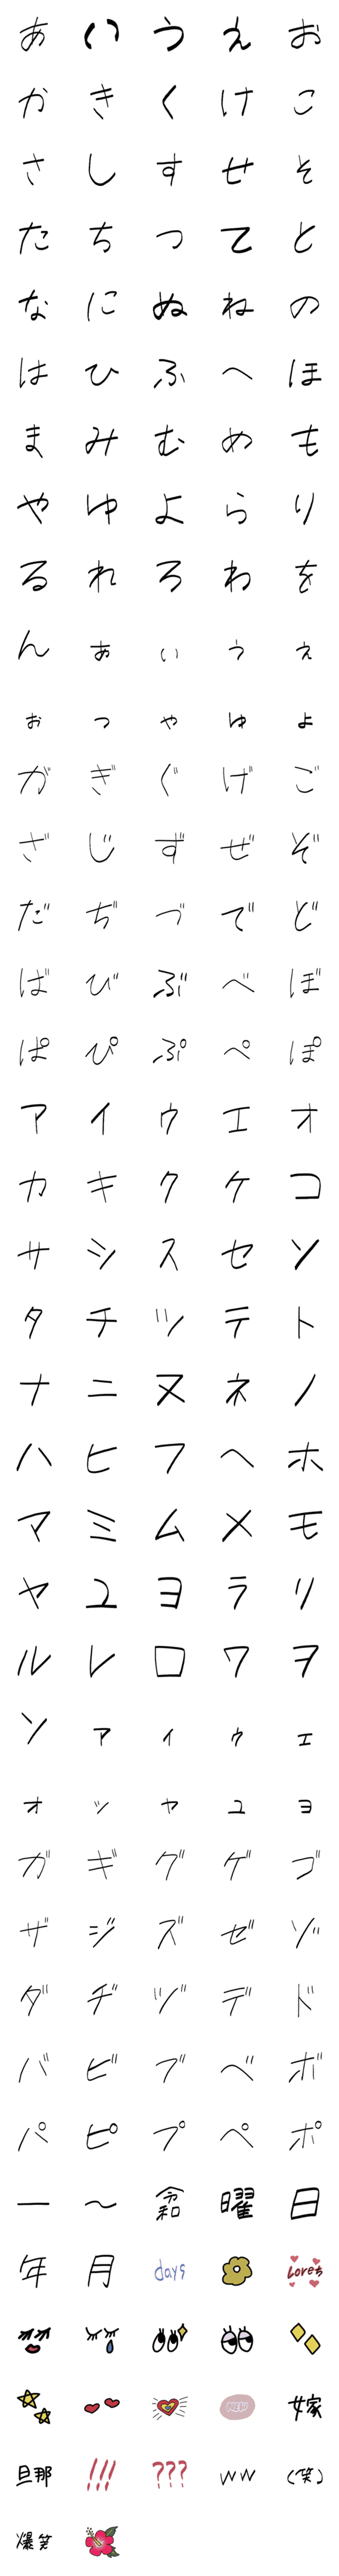 [LINE絵文字]ギャル文字マーカーの画像一覧